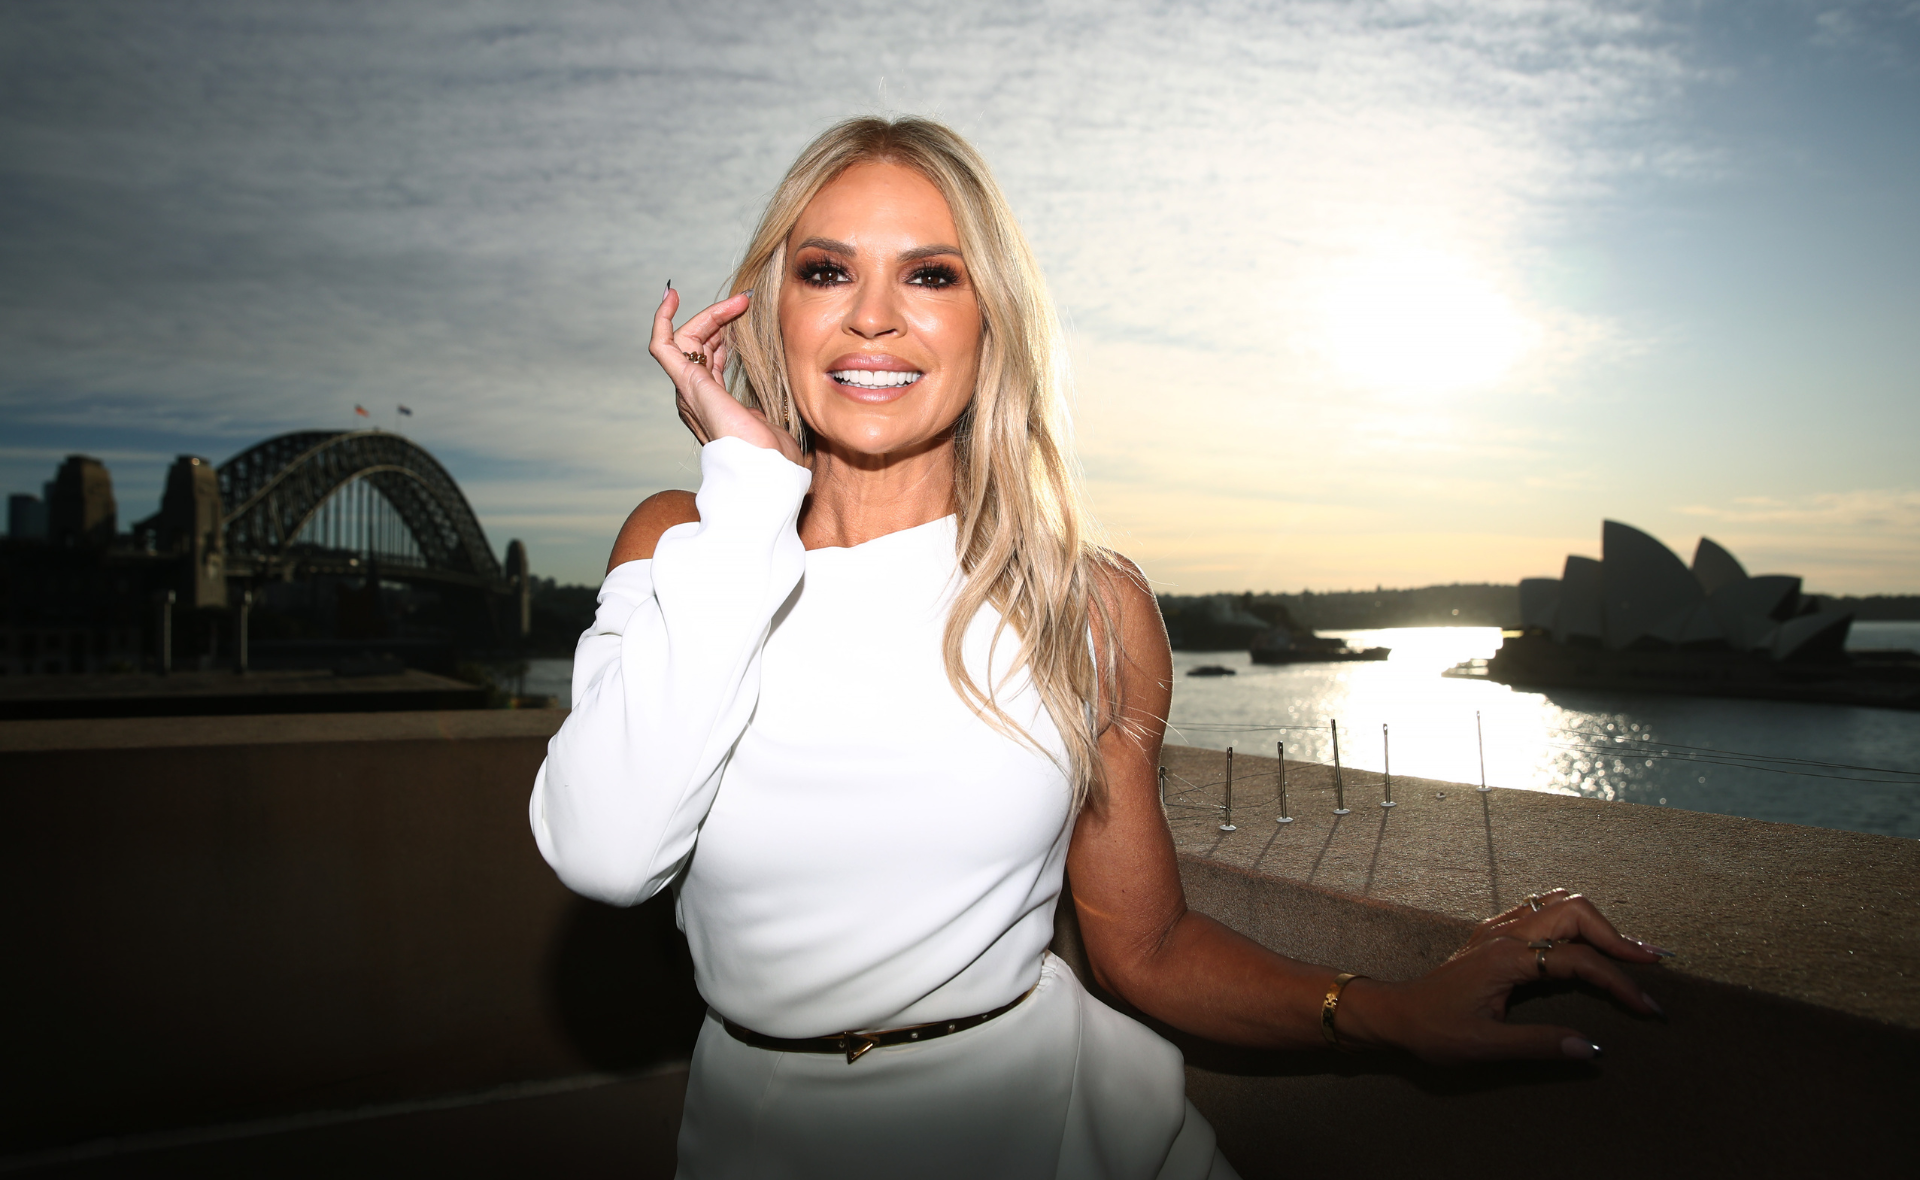 “I just feel very lucky”: Sonia Kruger on her Gold Logie nomination and hosting with Dr Chris Brown